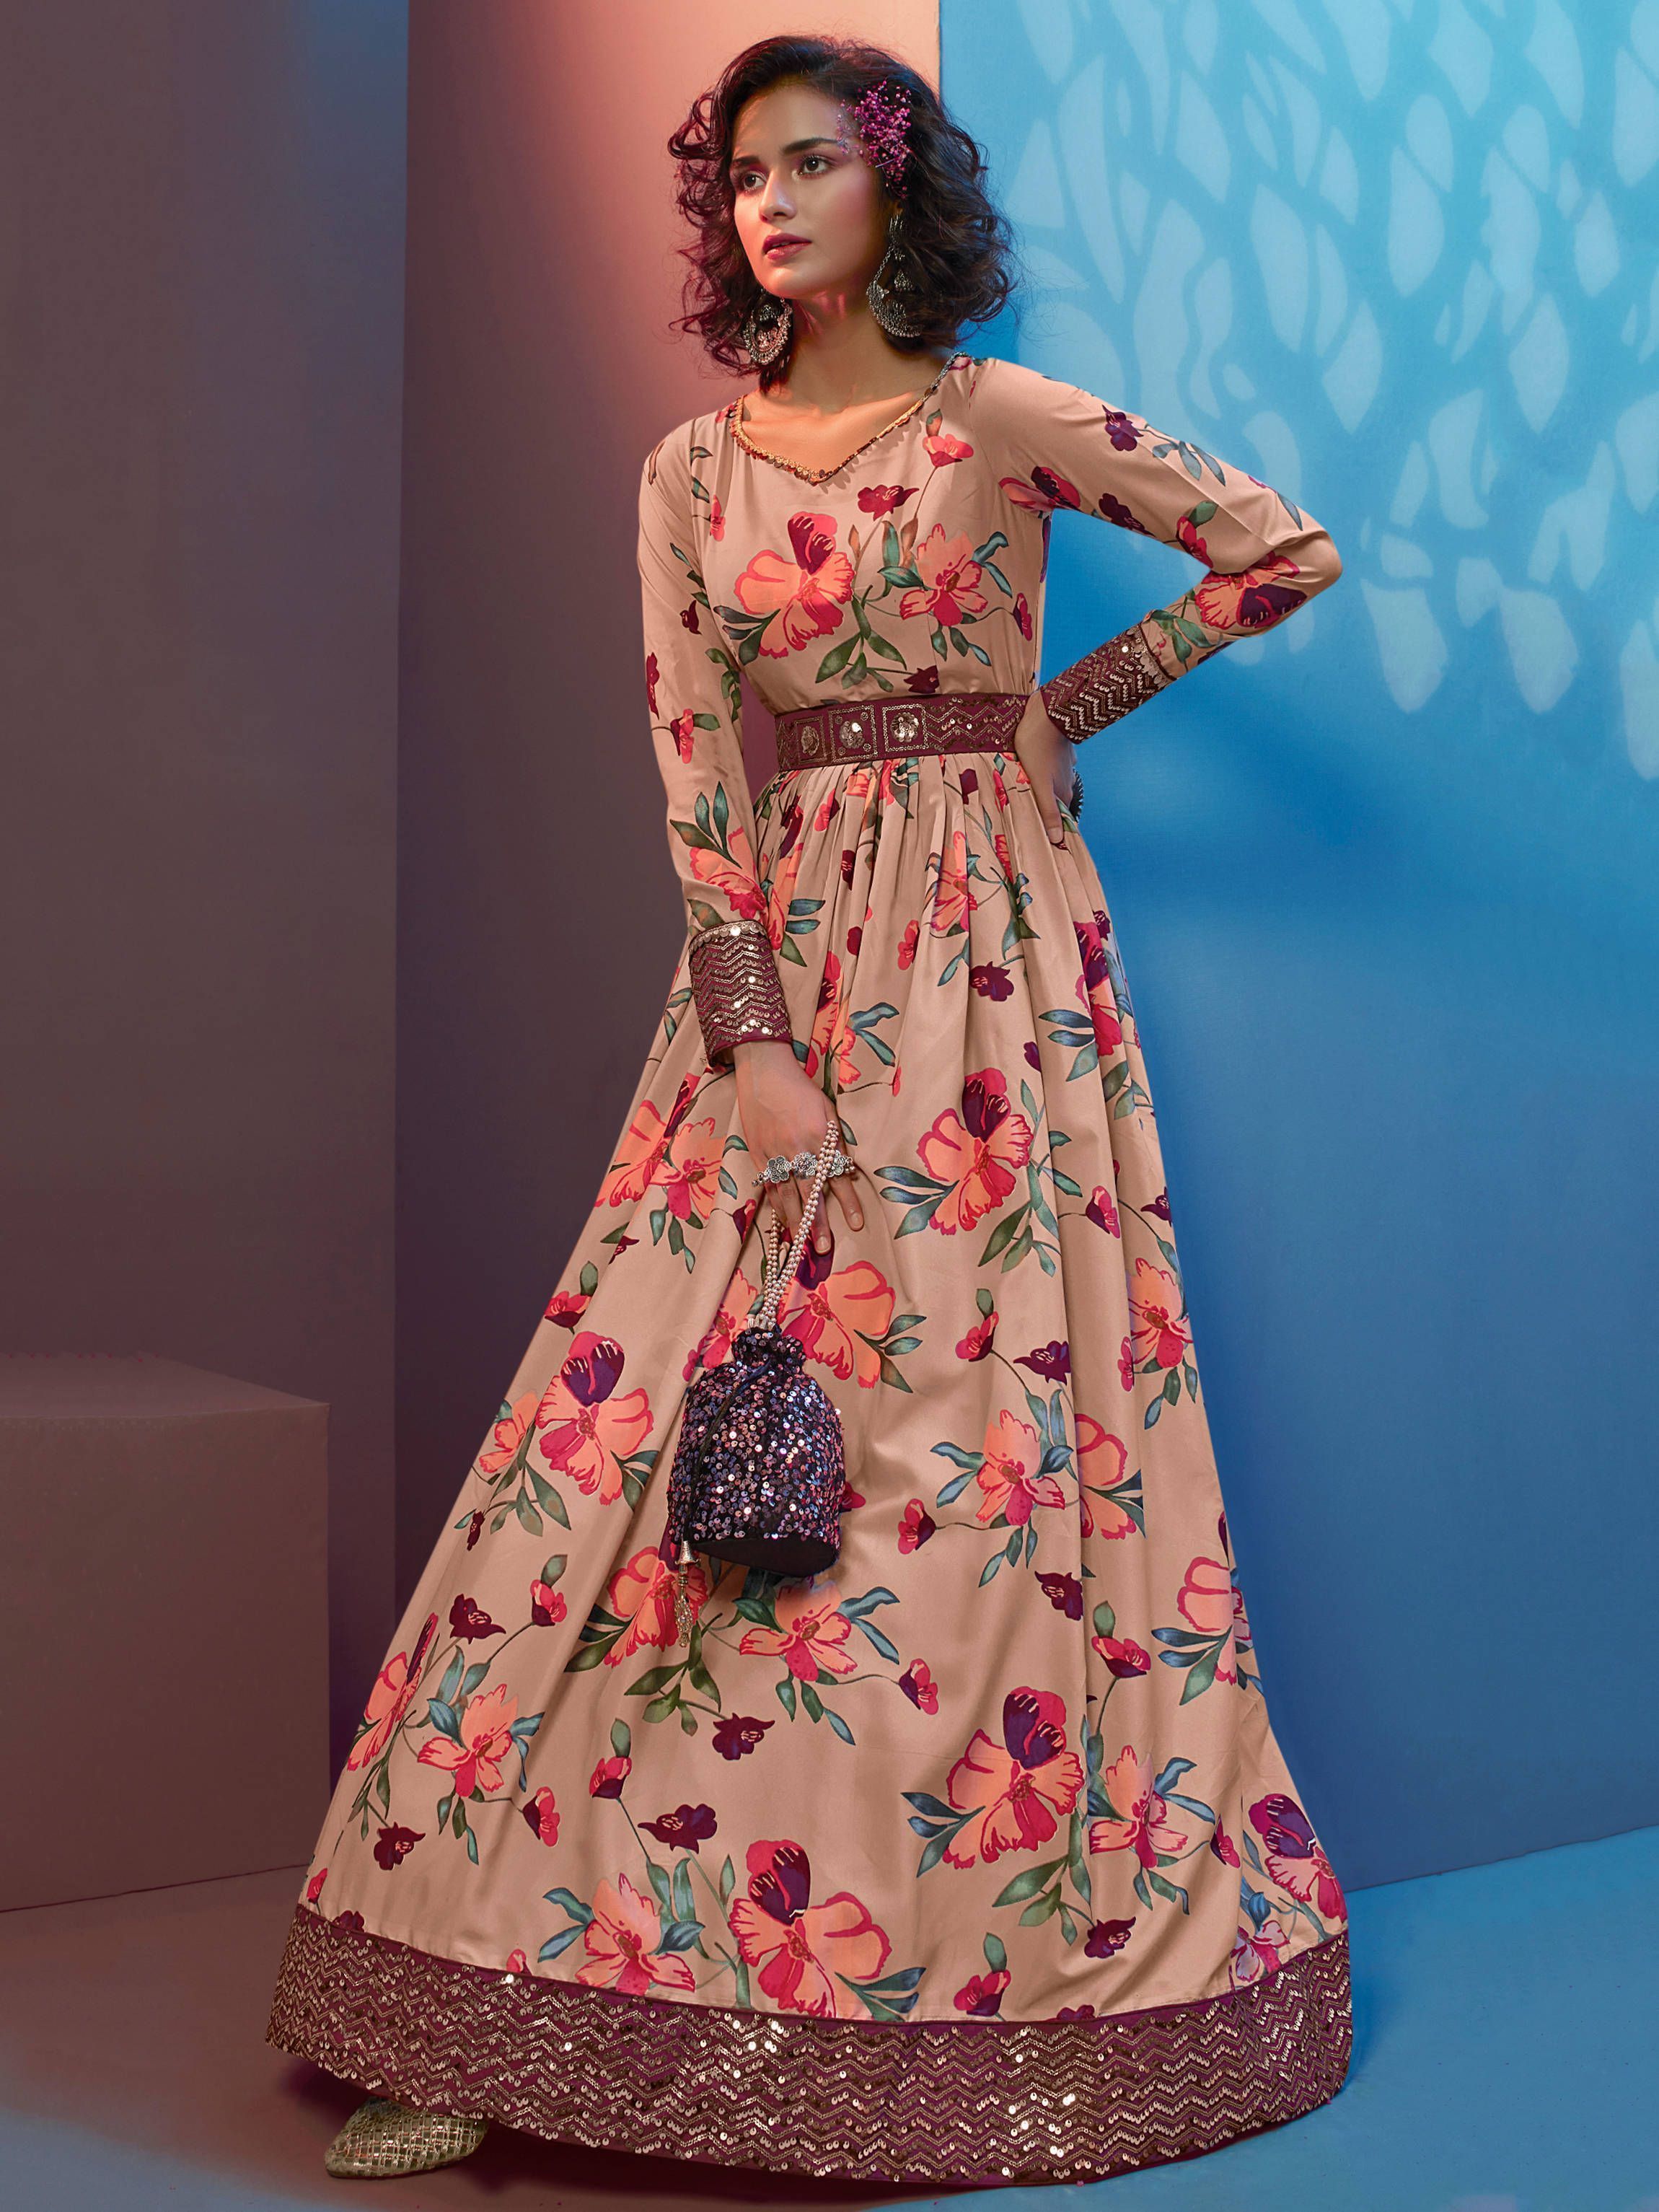 Peach Digital Print Dress | Printed gowns, Cotton gowns, Frock design